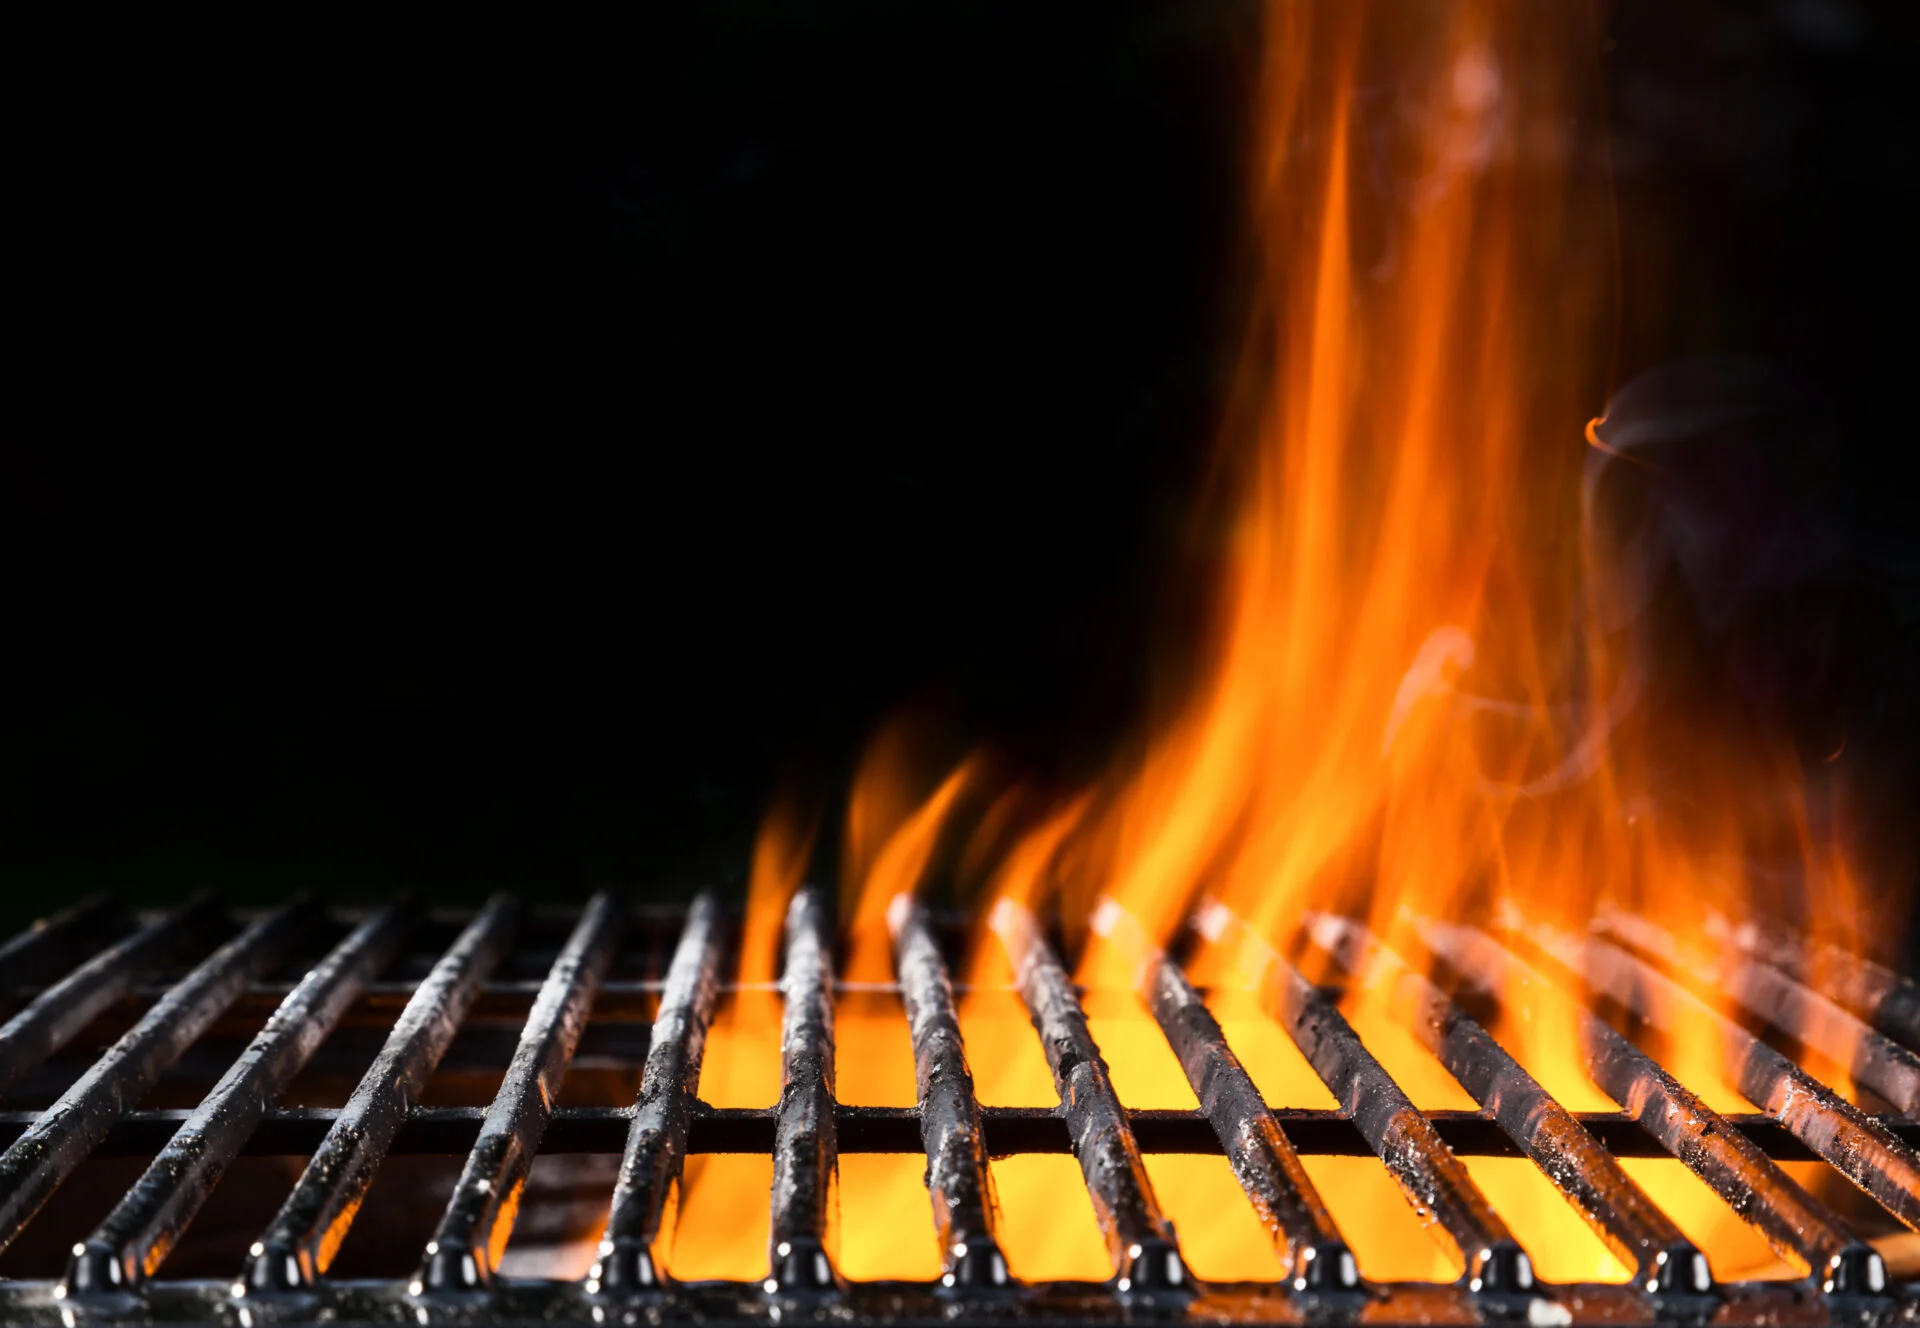 Empty grill grid in fire with black background